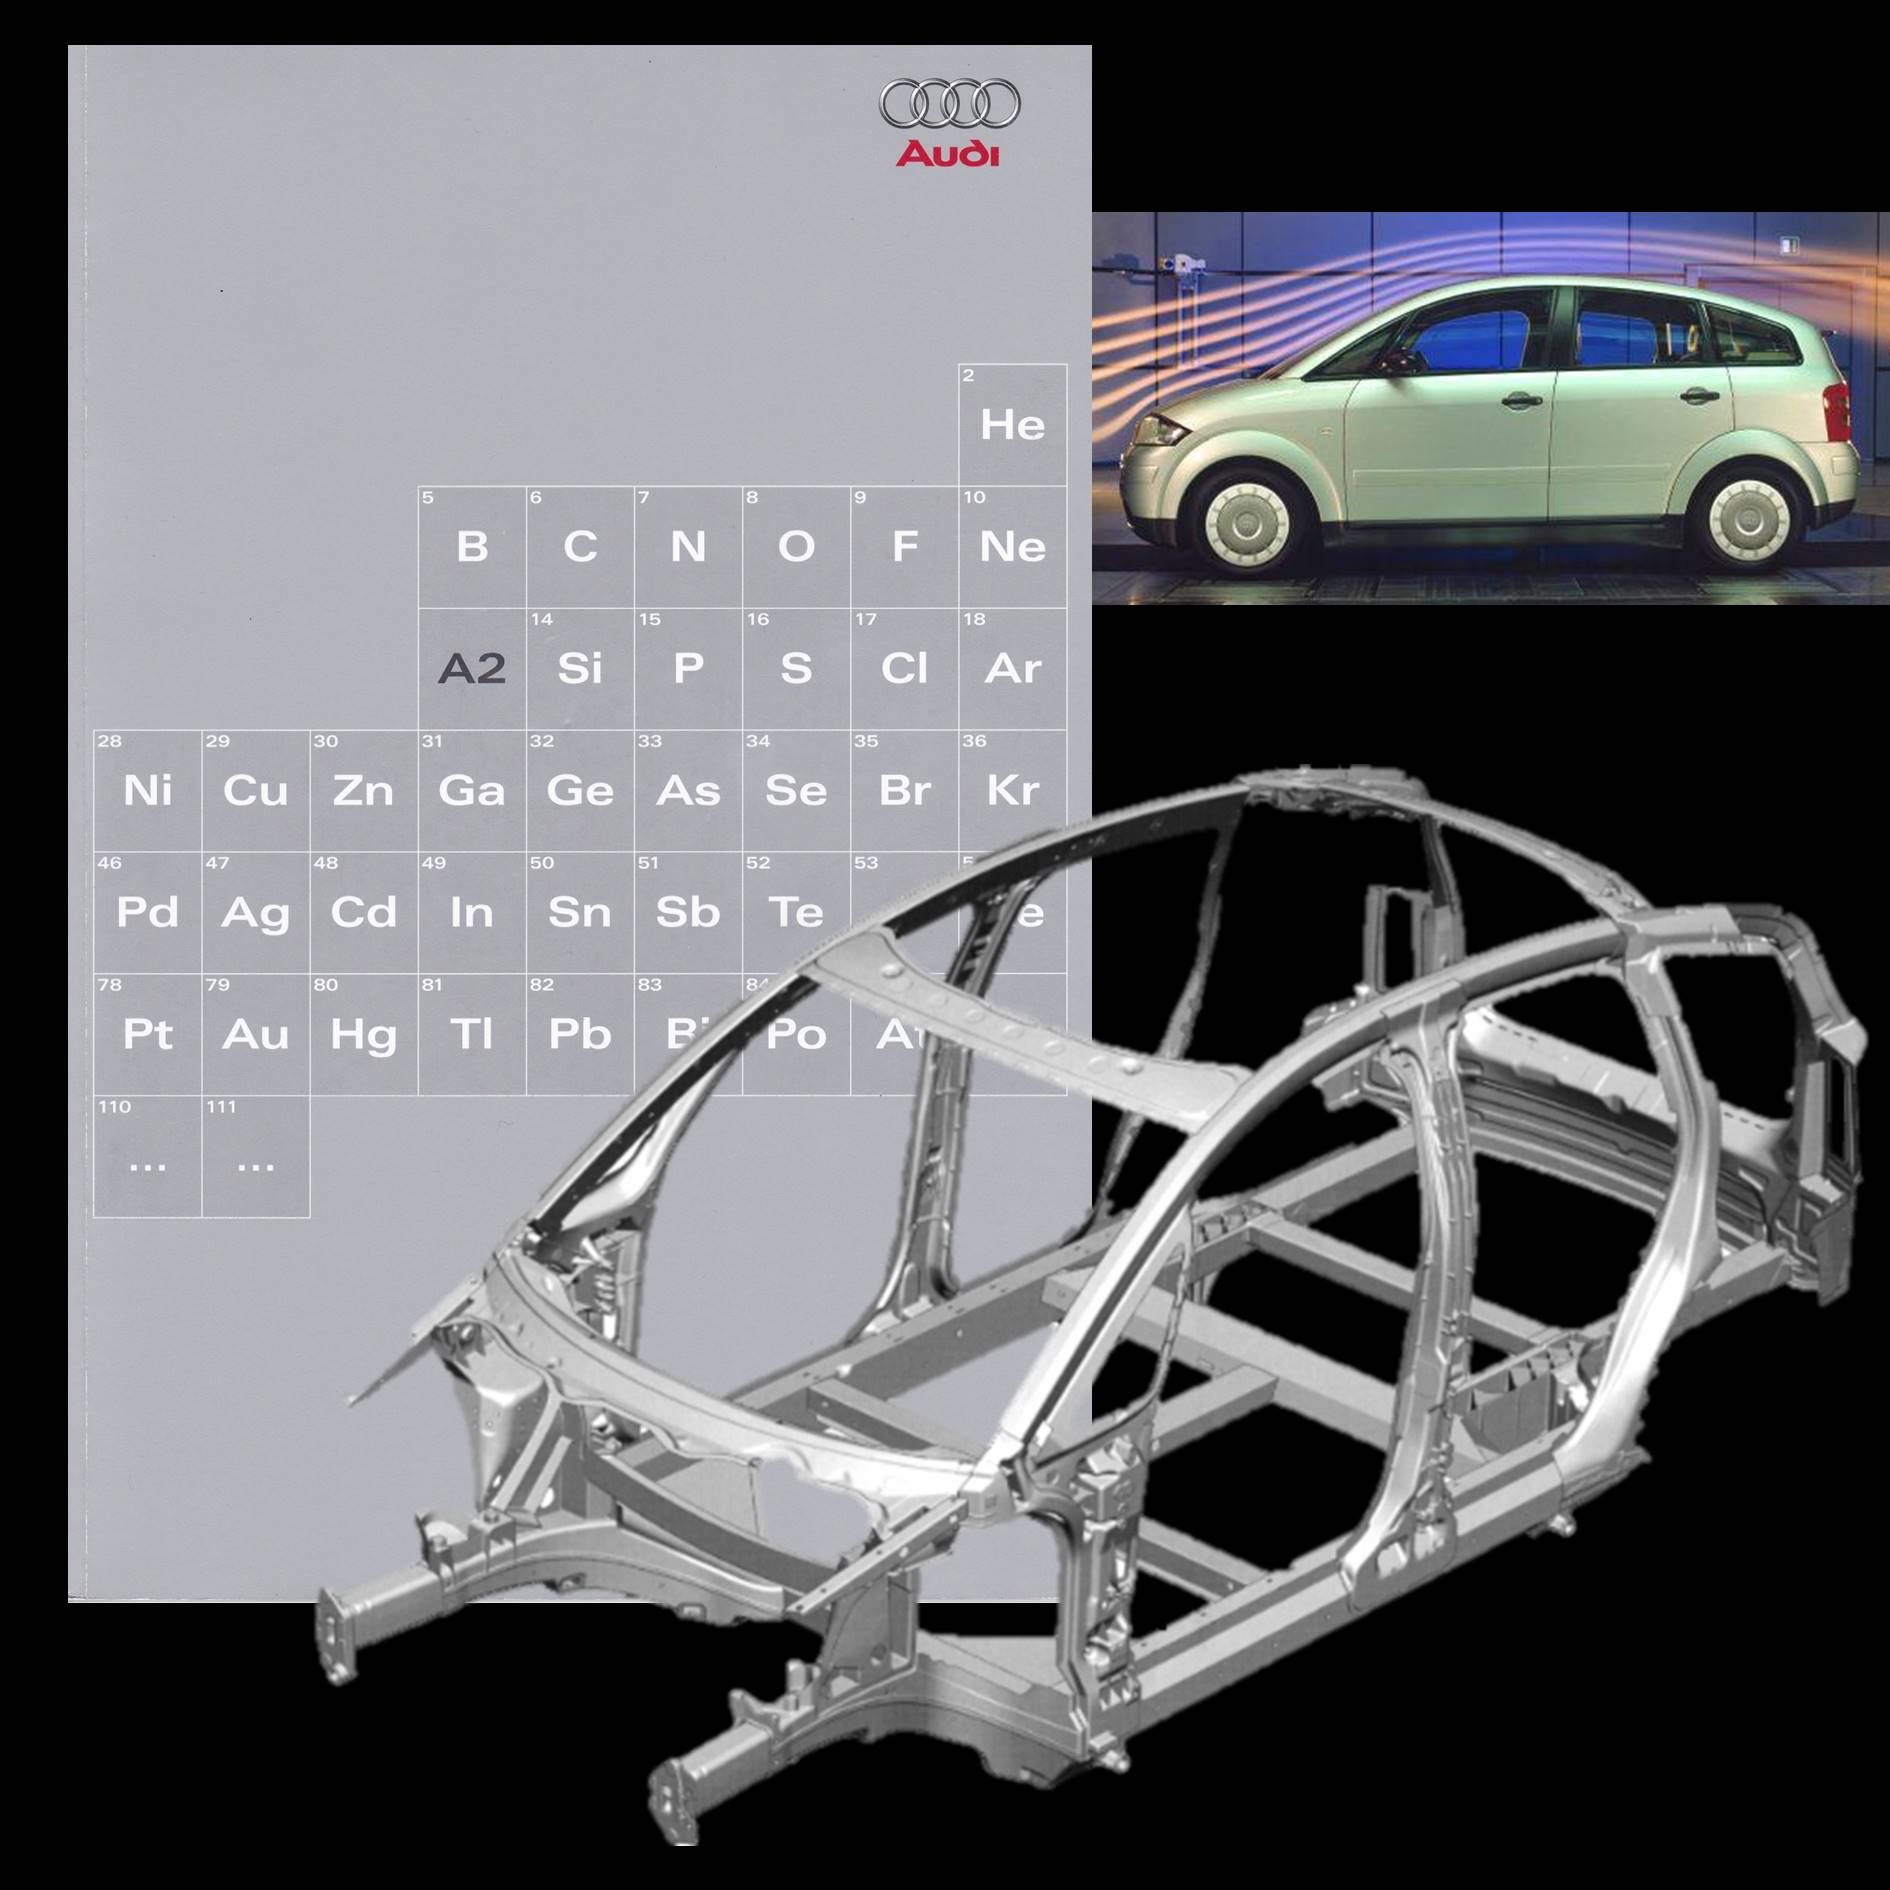 Aluminum frame for a car, silver brochure and a car seen from the side with graphical representation of air flows